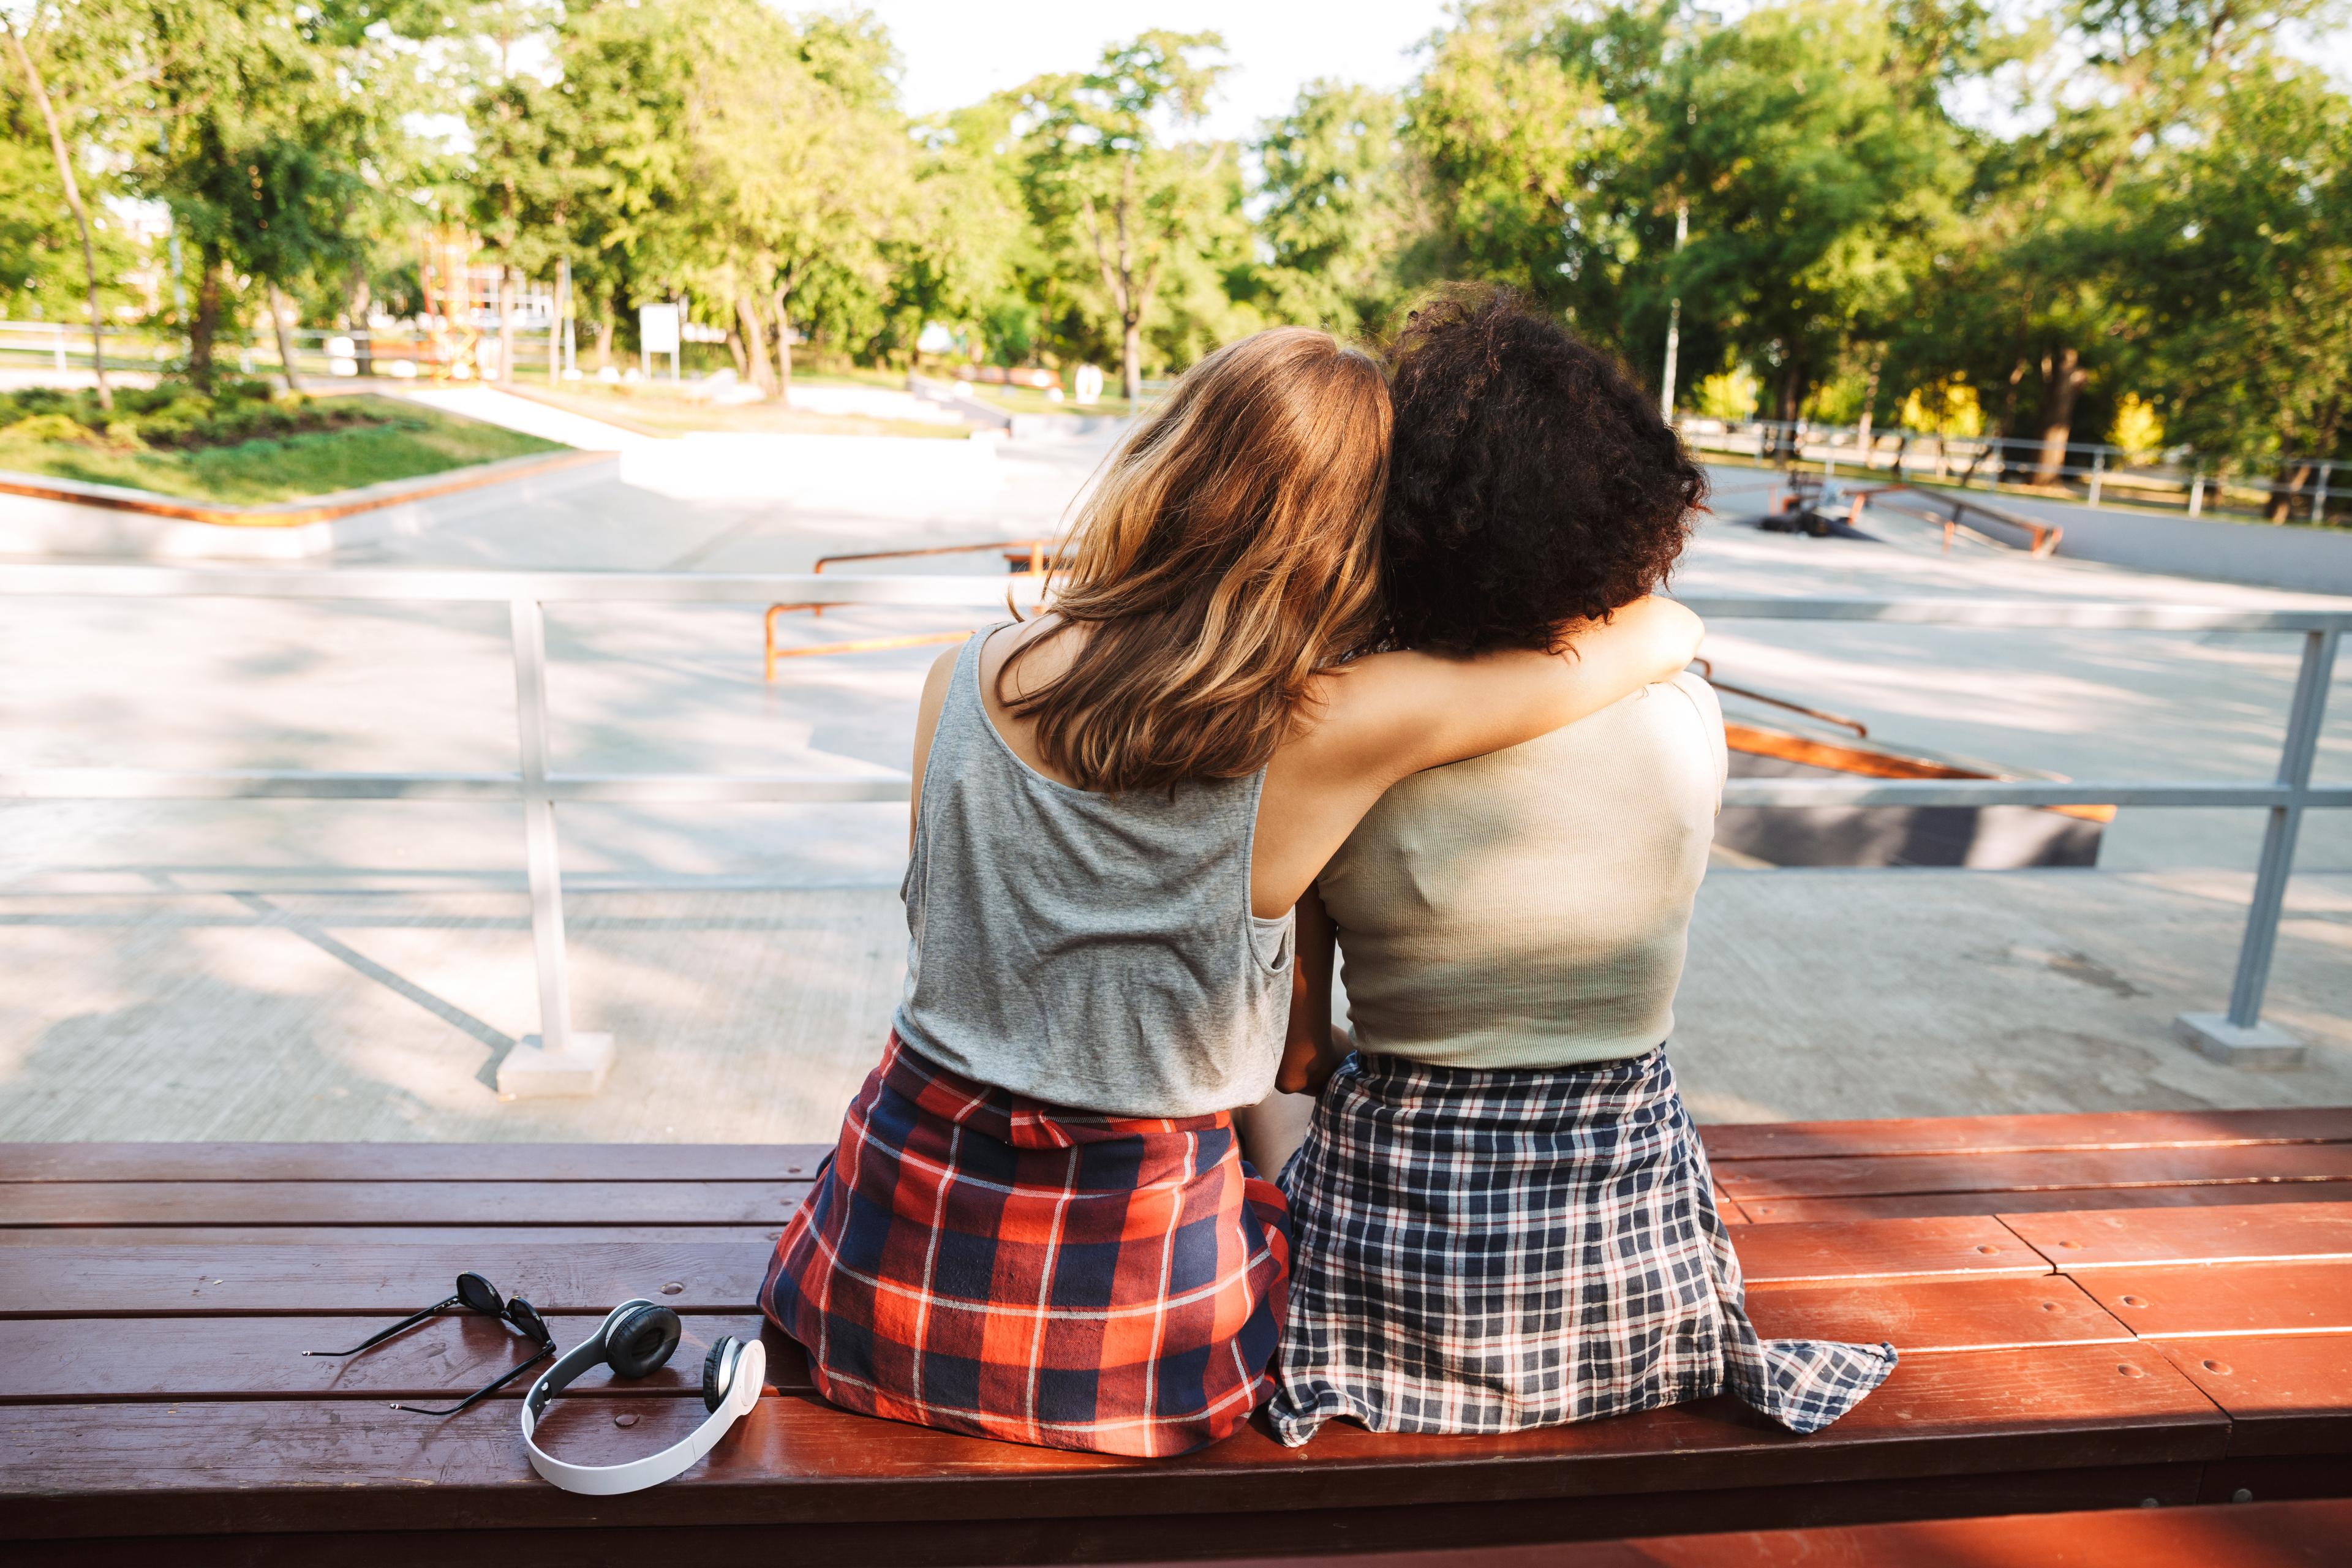 Two female friends sit with arms around each other, backs to the camera